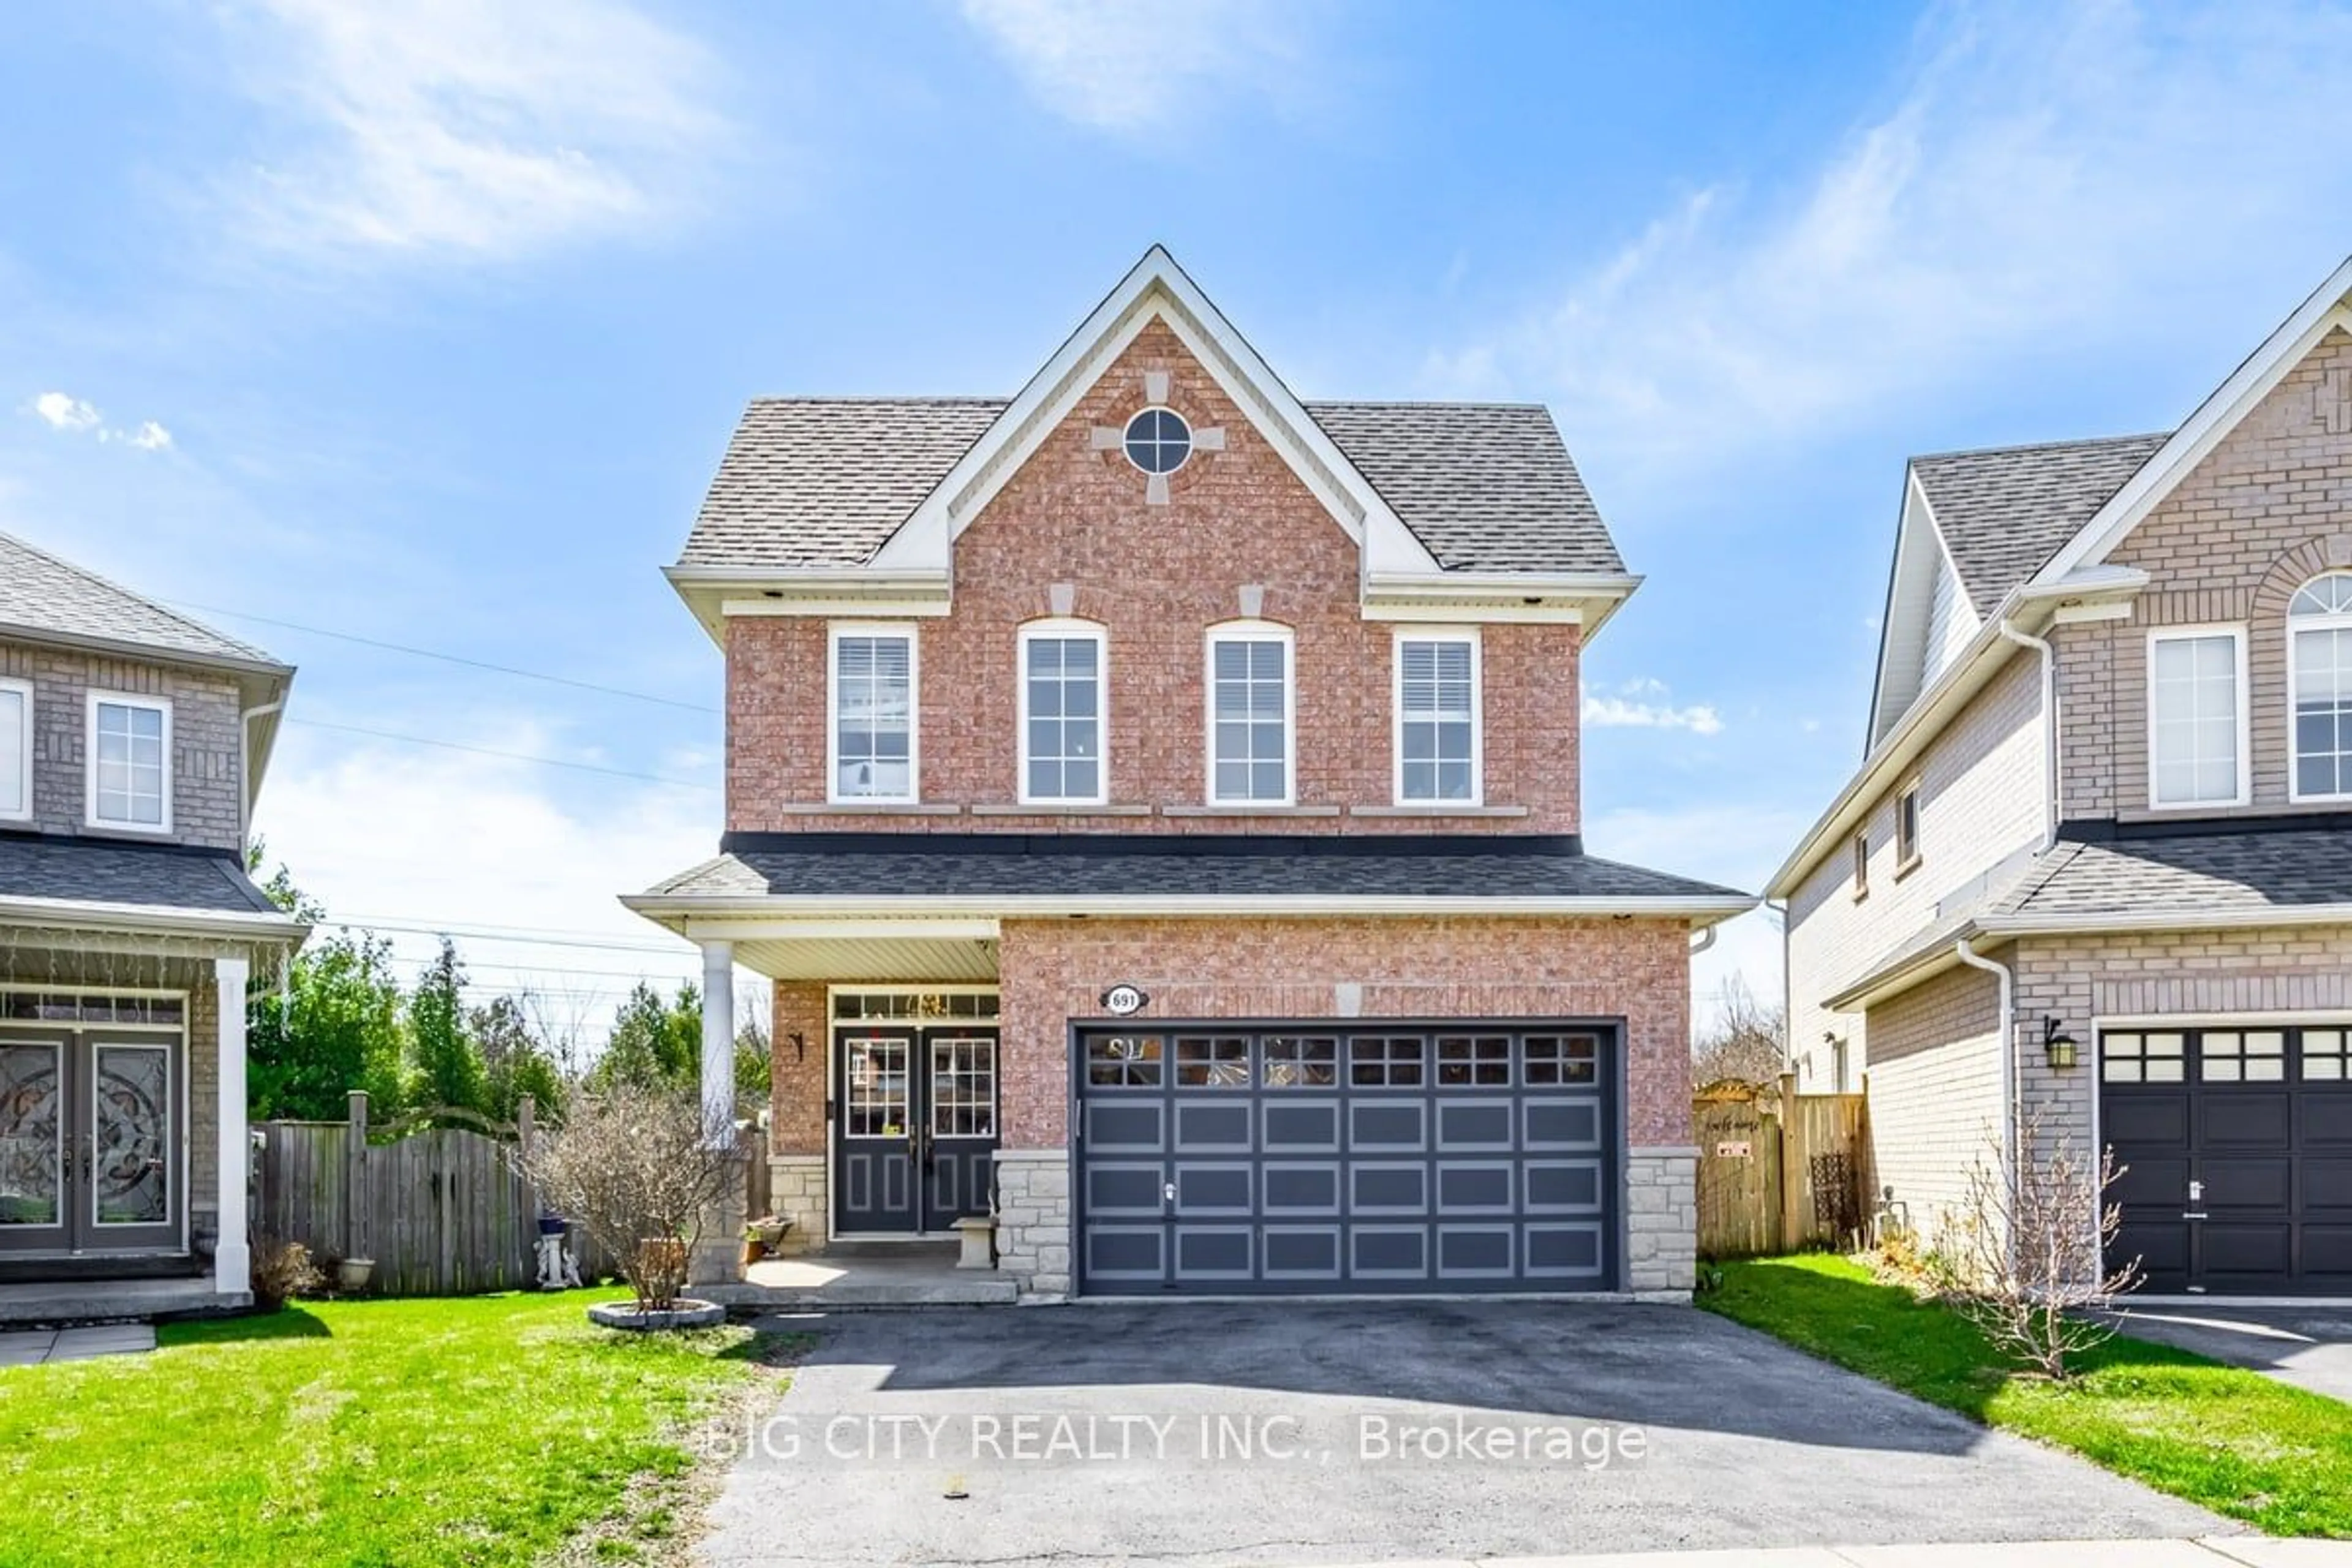 Home with brick exterior material for 691 Sunbird Tr, Pickering Ontario L1X 2X7